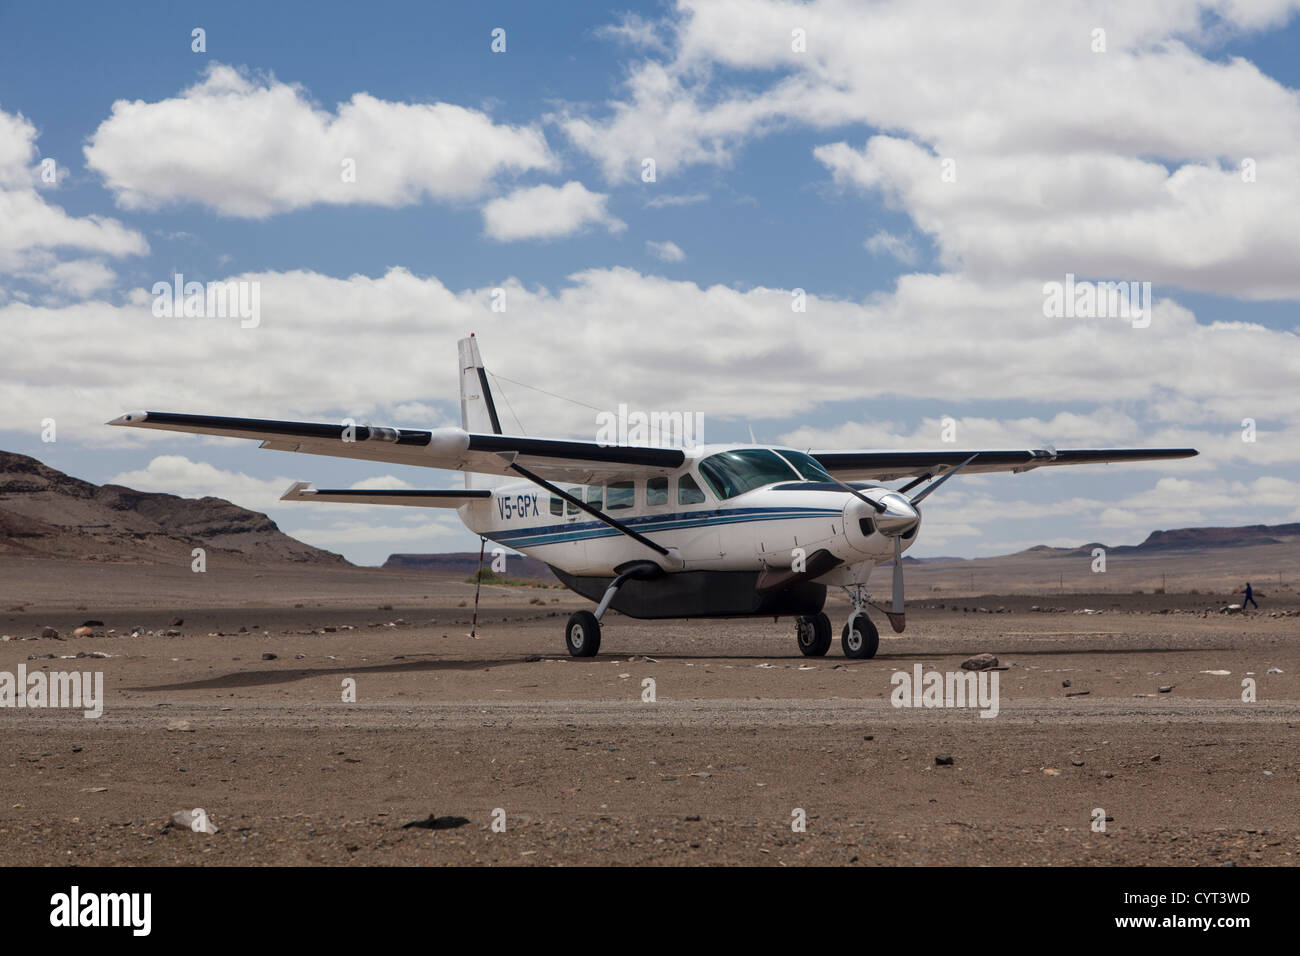 Cessna C208 Caravan at Steinkopf airstrip, Northern Cape, South Africa. Stock Photo